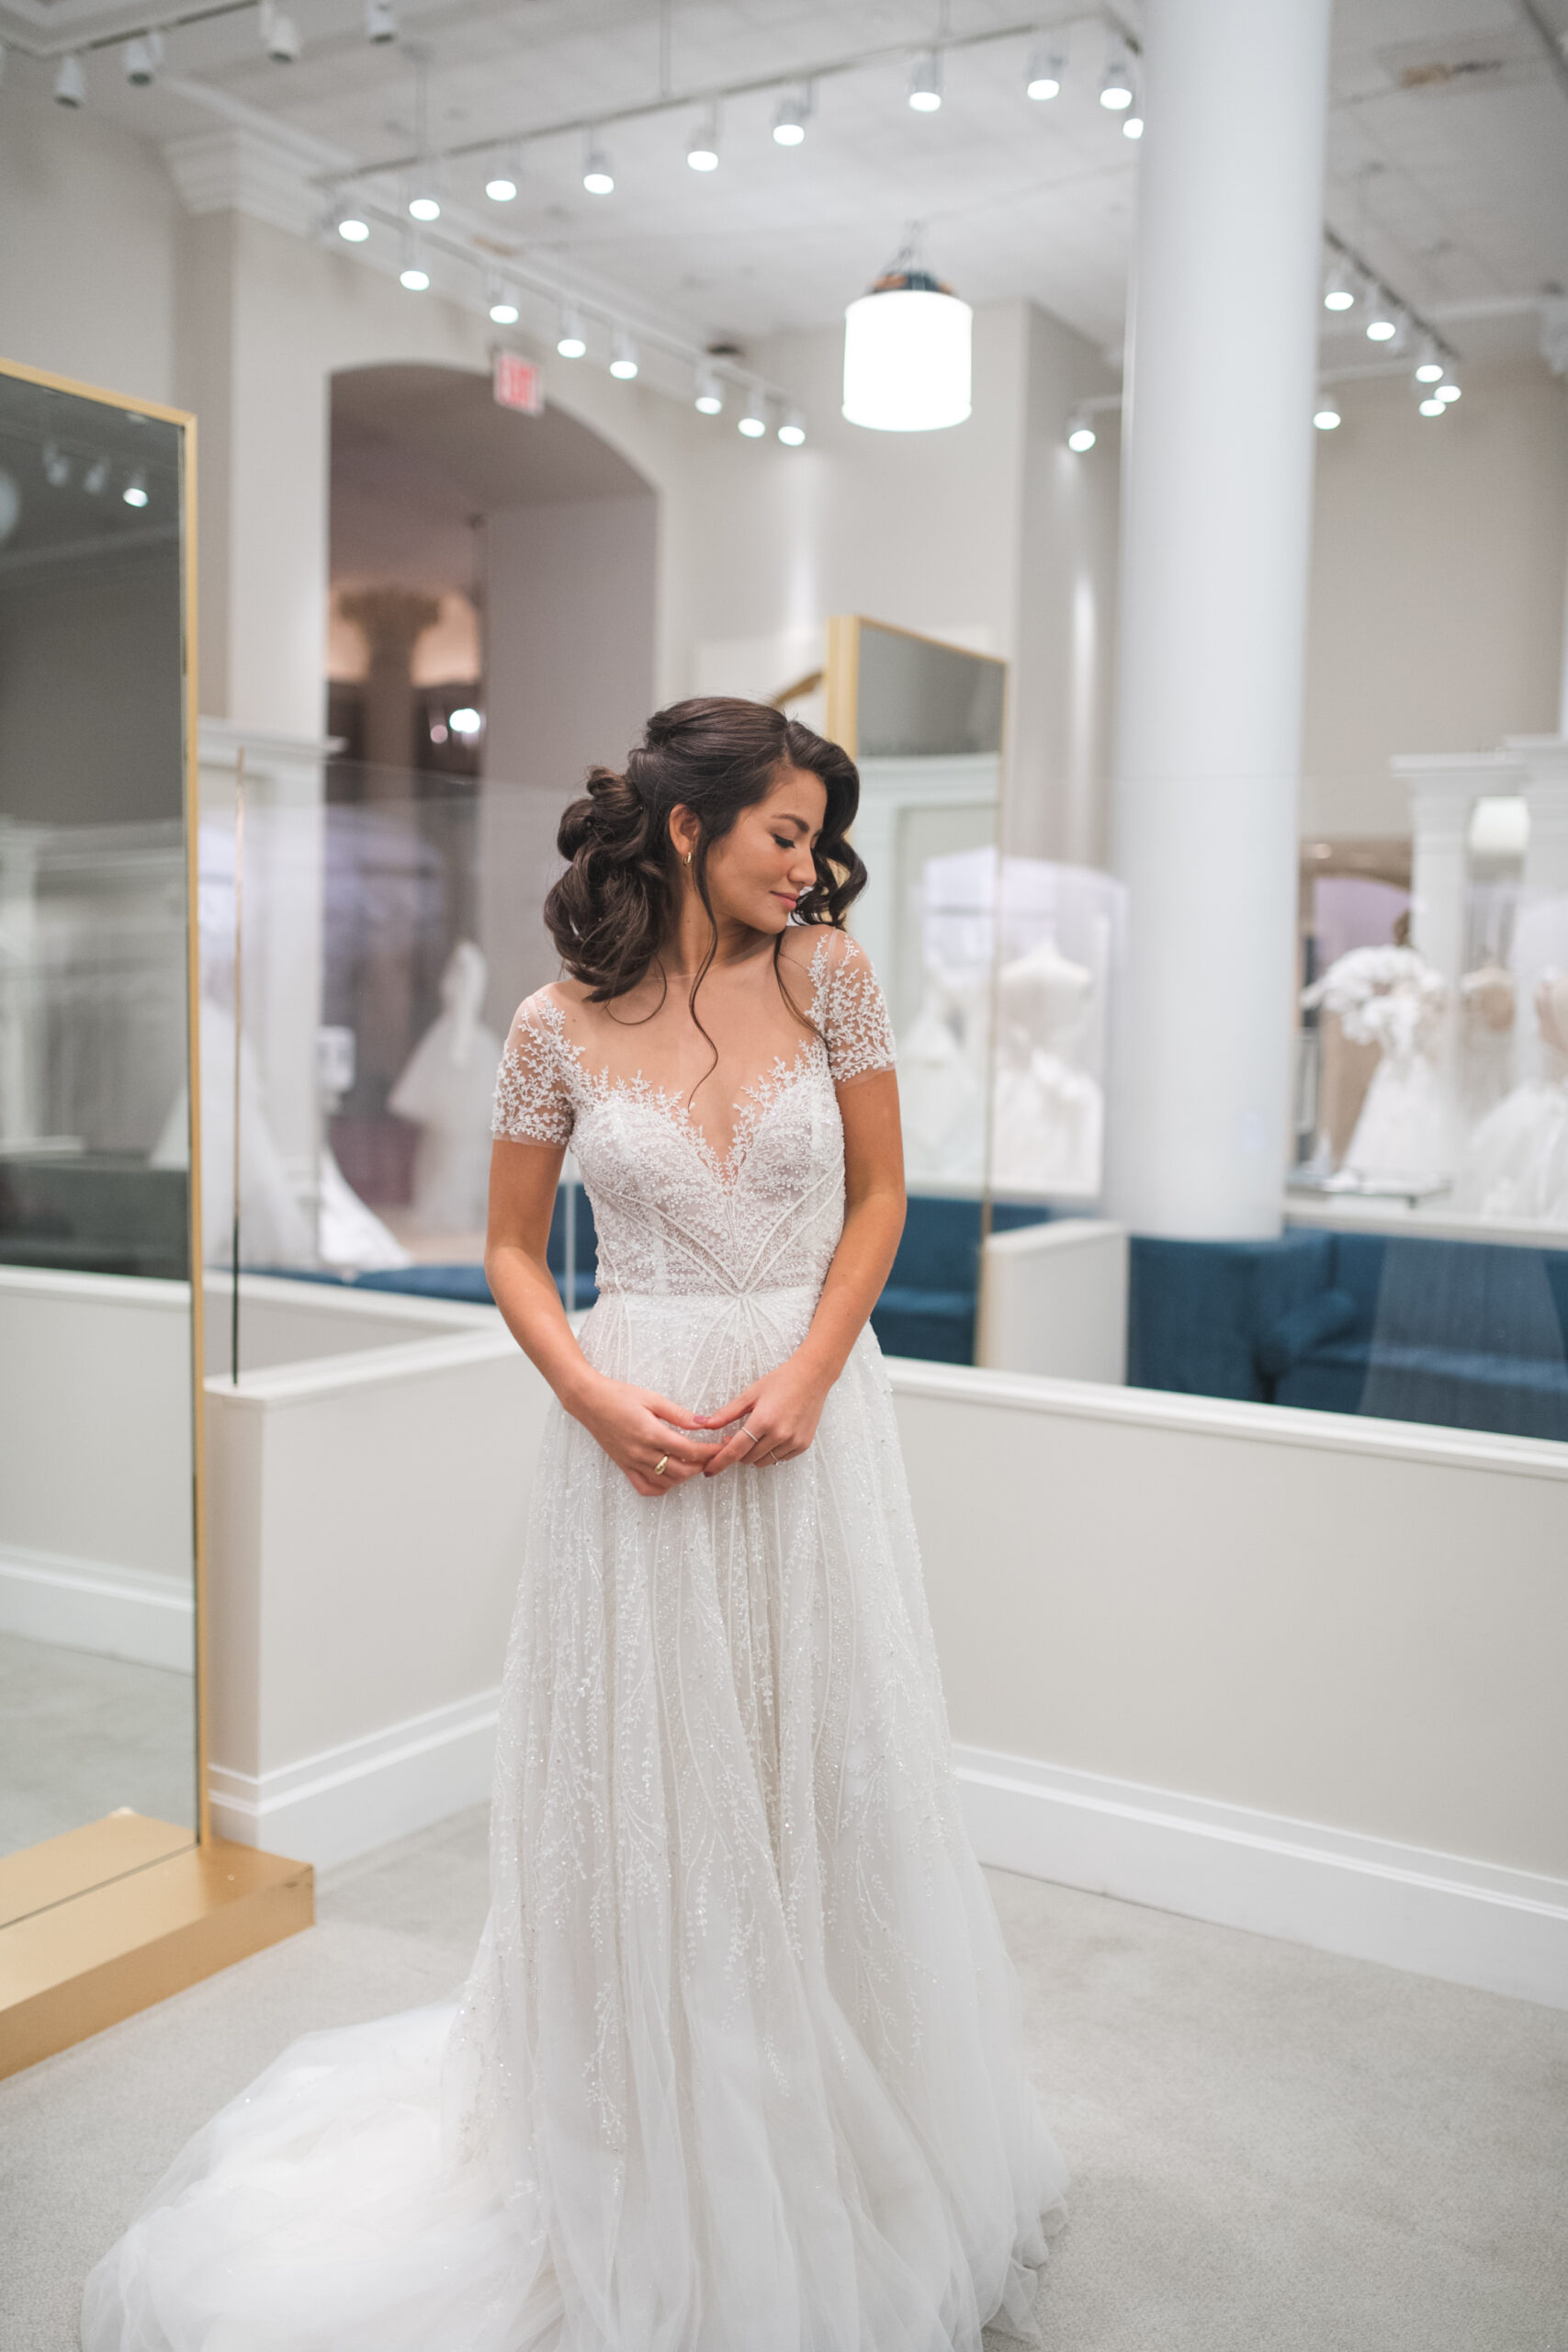 What it’s like “Saying Yes to the Dress” at Kleinfeld Bridal Pre